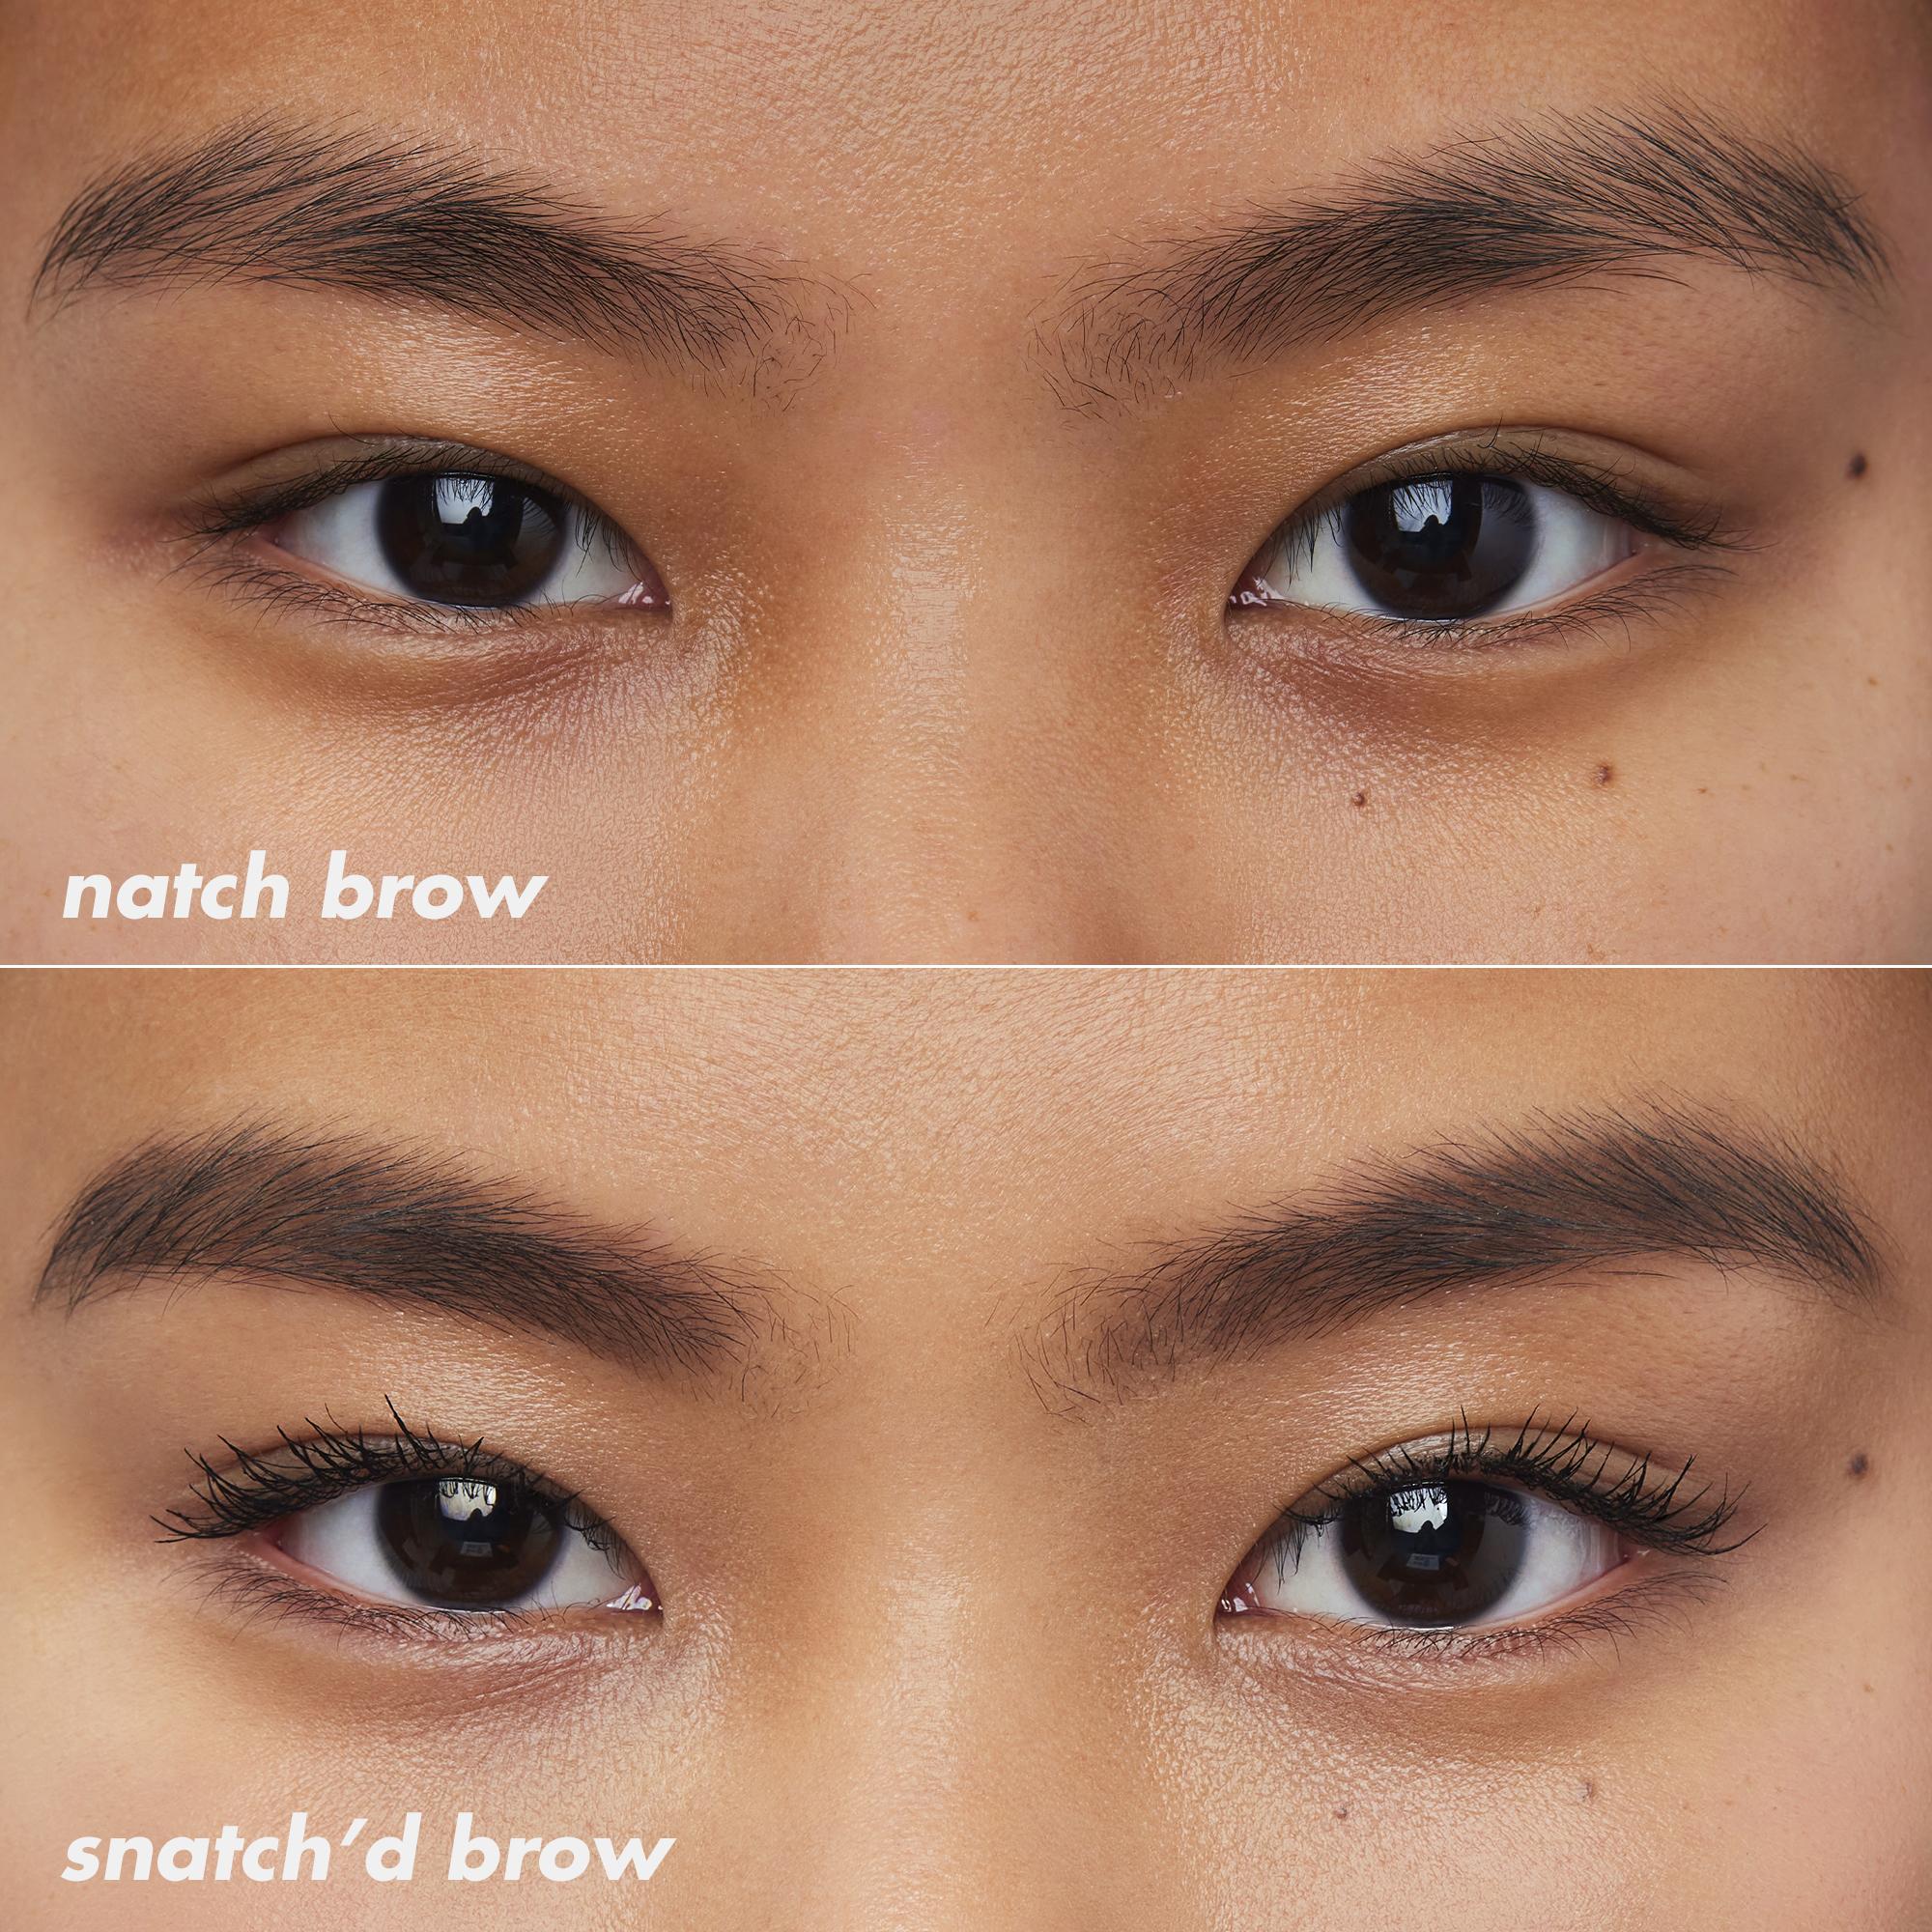 e.l.f. Instant Lift Brow Pencil, Neutral Brown - image 4 of 9